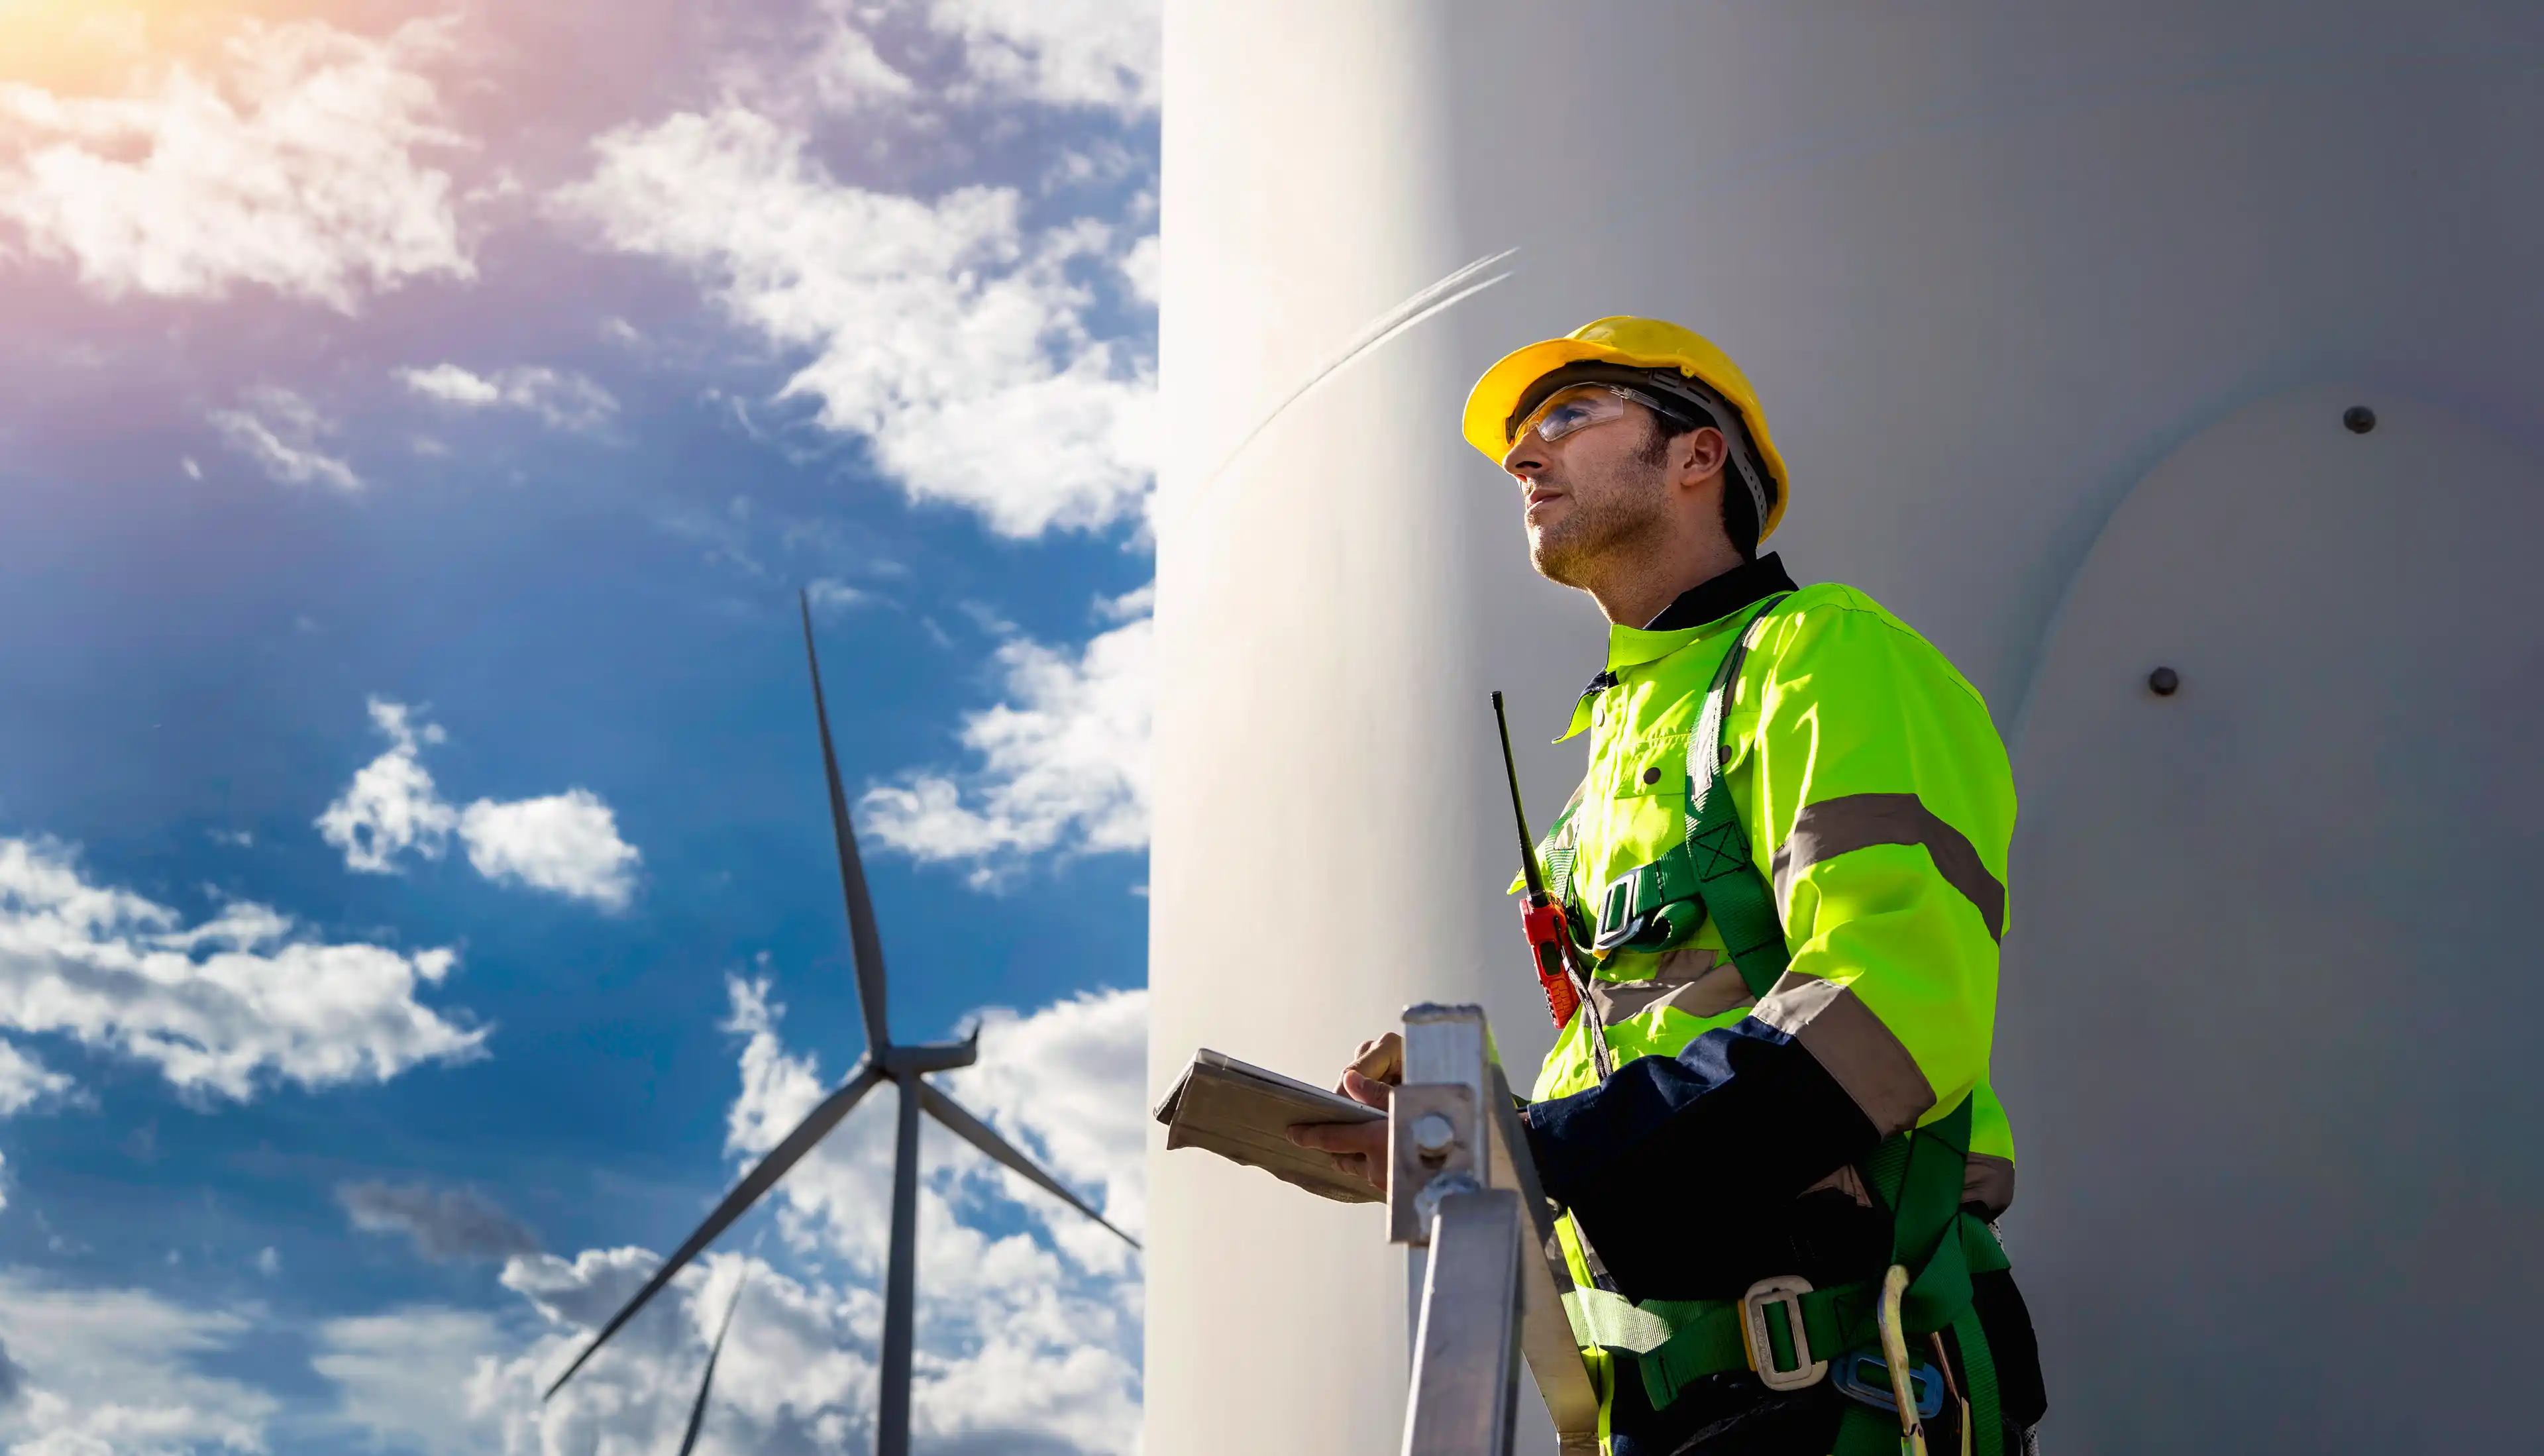 Engineer observing wind farms